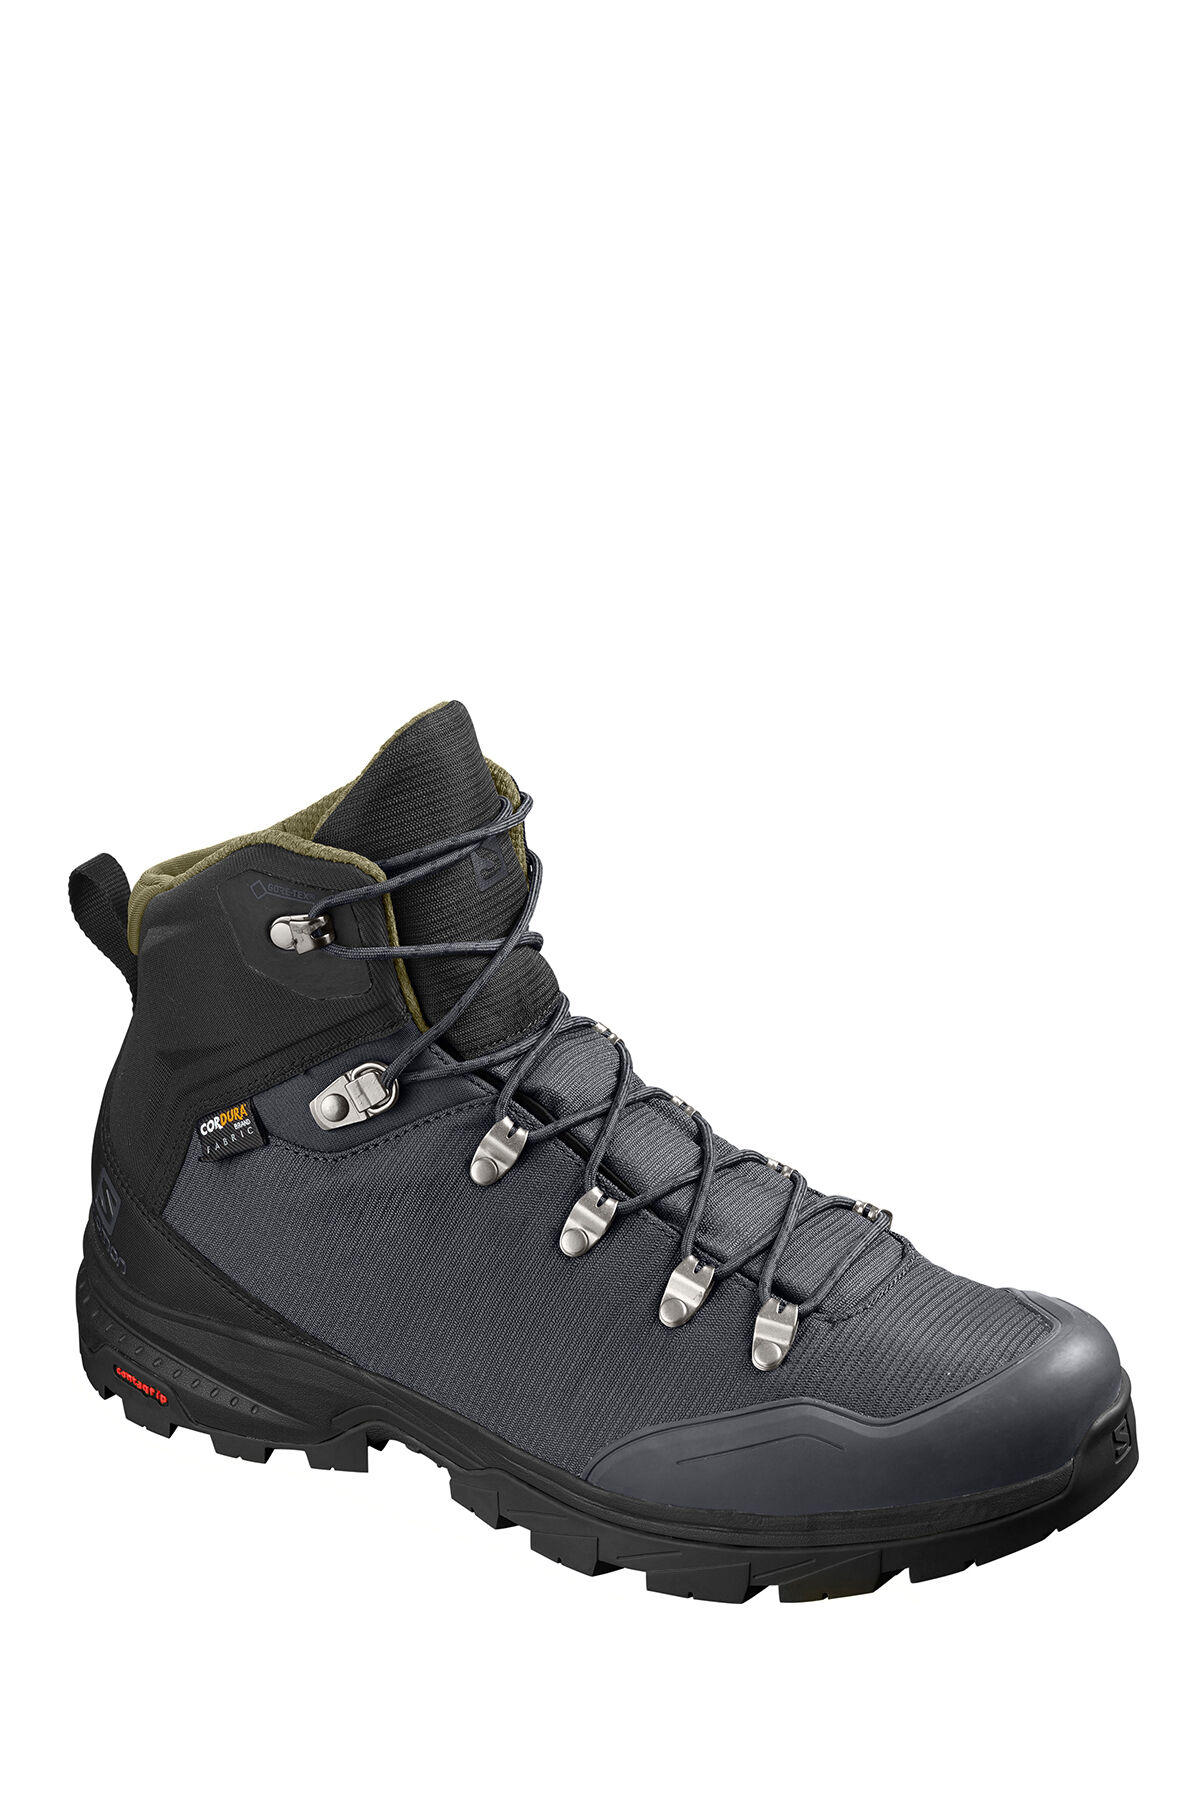 Salomon OUTback 500 GTX Men's Backpacking Boots 